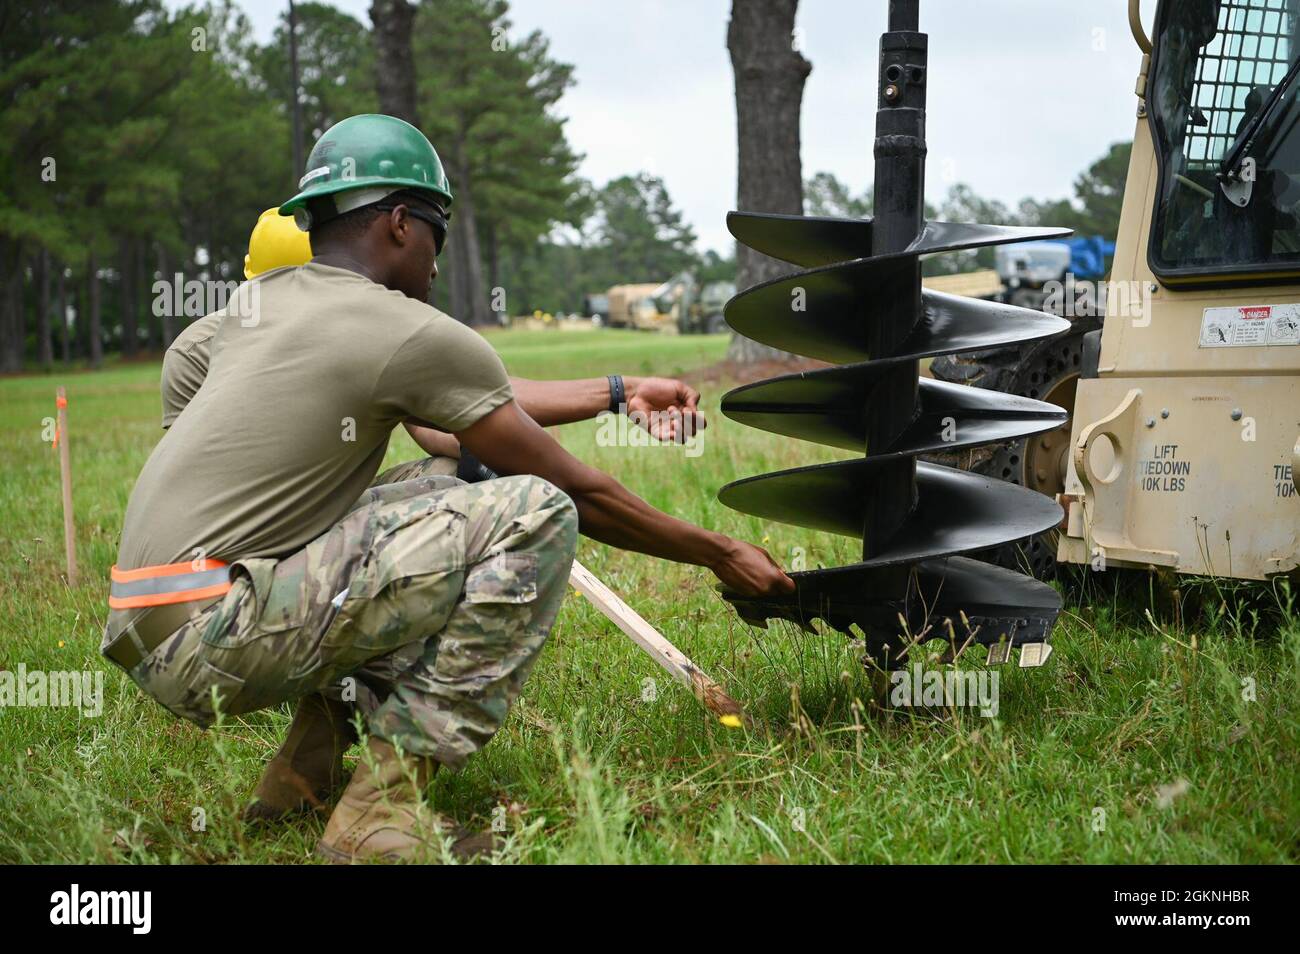 U.S. Army National Guard Soldiers with the 1223rd Vertical Engineering Company, South Carolina National Guard, build an air assault obstacle course June 6, 2021, at McCrady Training Center, Eastover, South Carolina. The course is intended for future training operations that will take place at the training center. Stock Photo